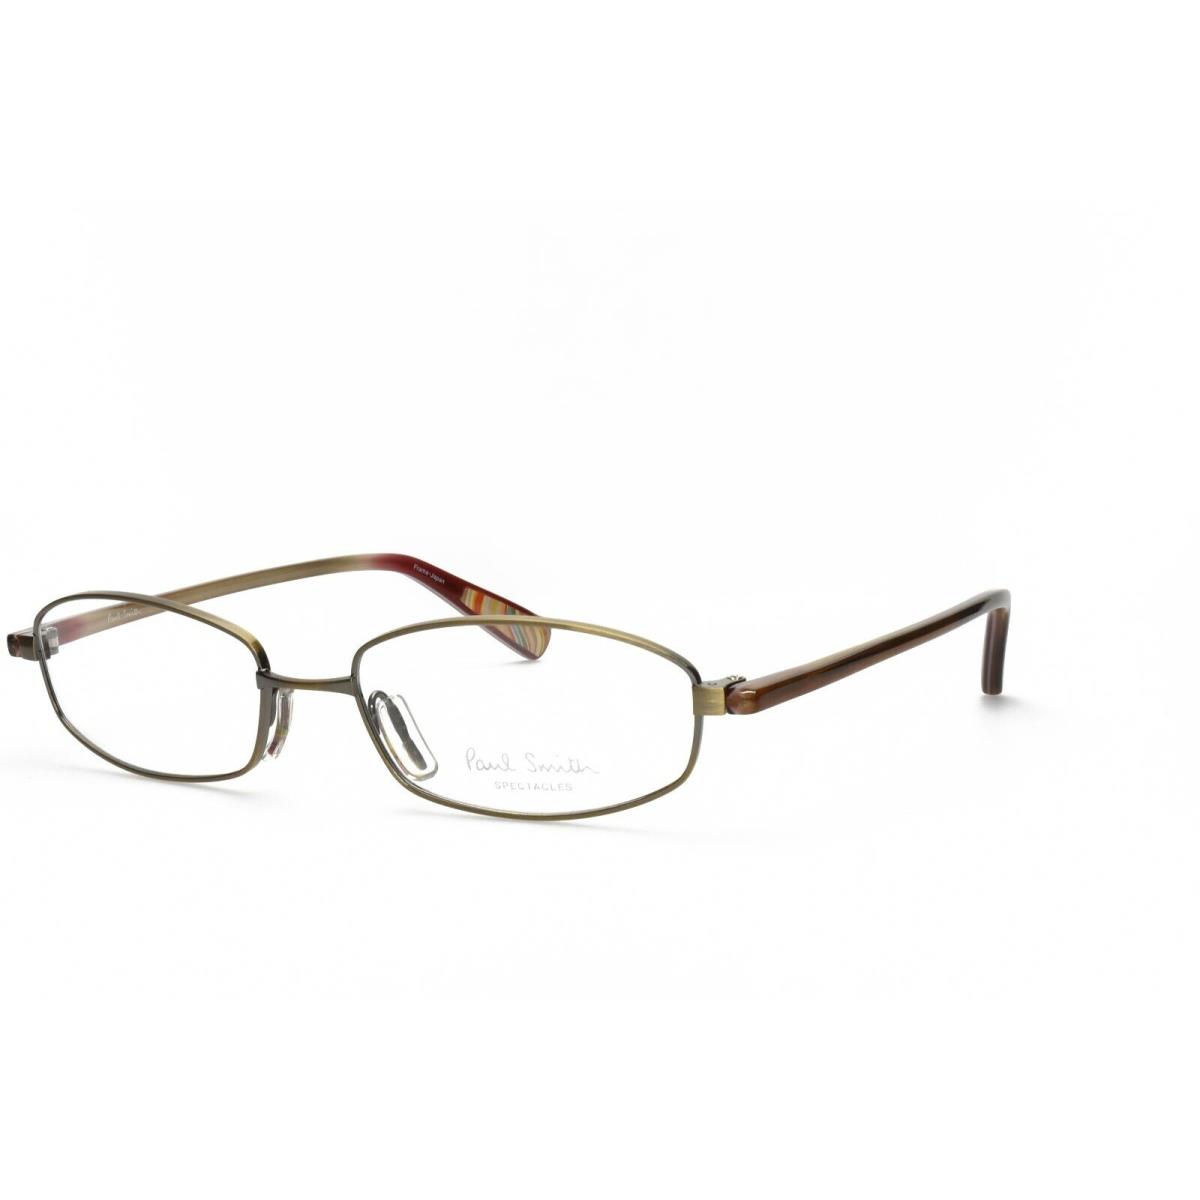 Paul Smith PS 194 TW Eyeglasses Frames Only 51-16-140